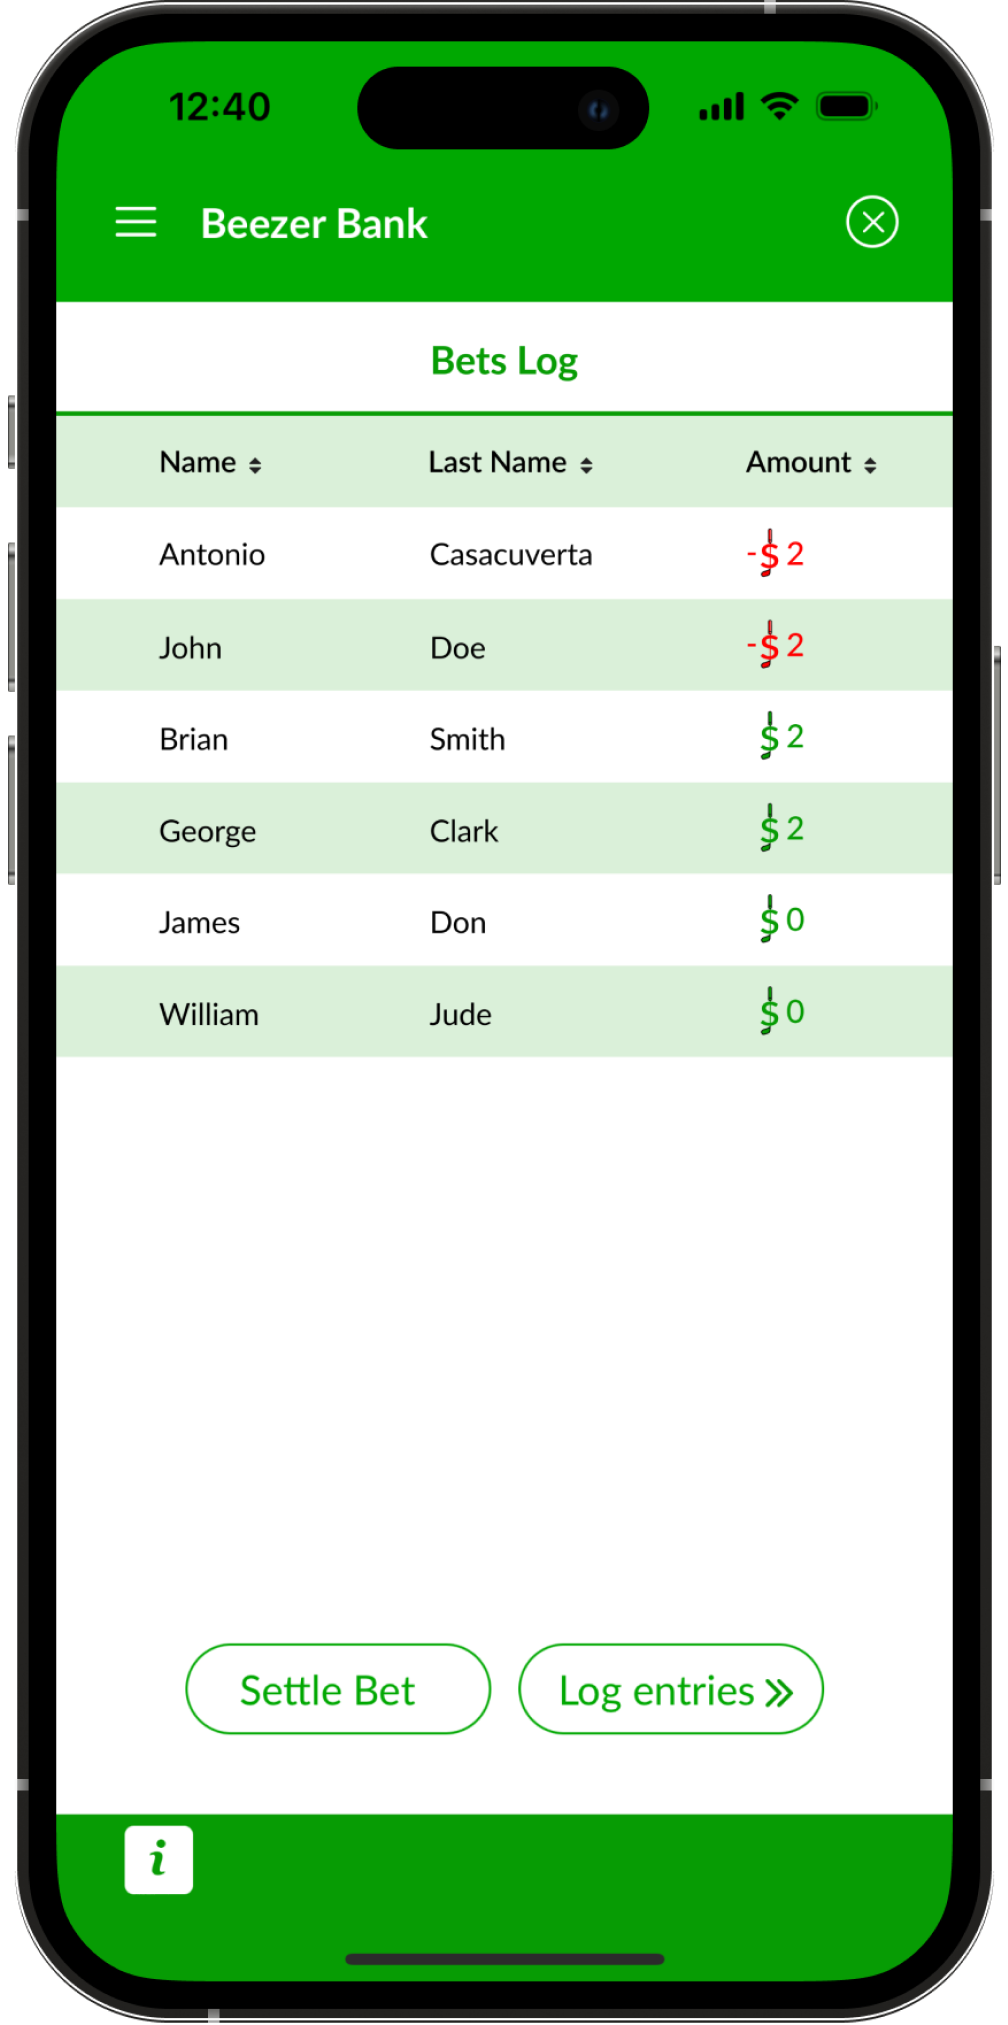 Golf Bets Tracking App screenshot showing the bets log